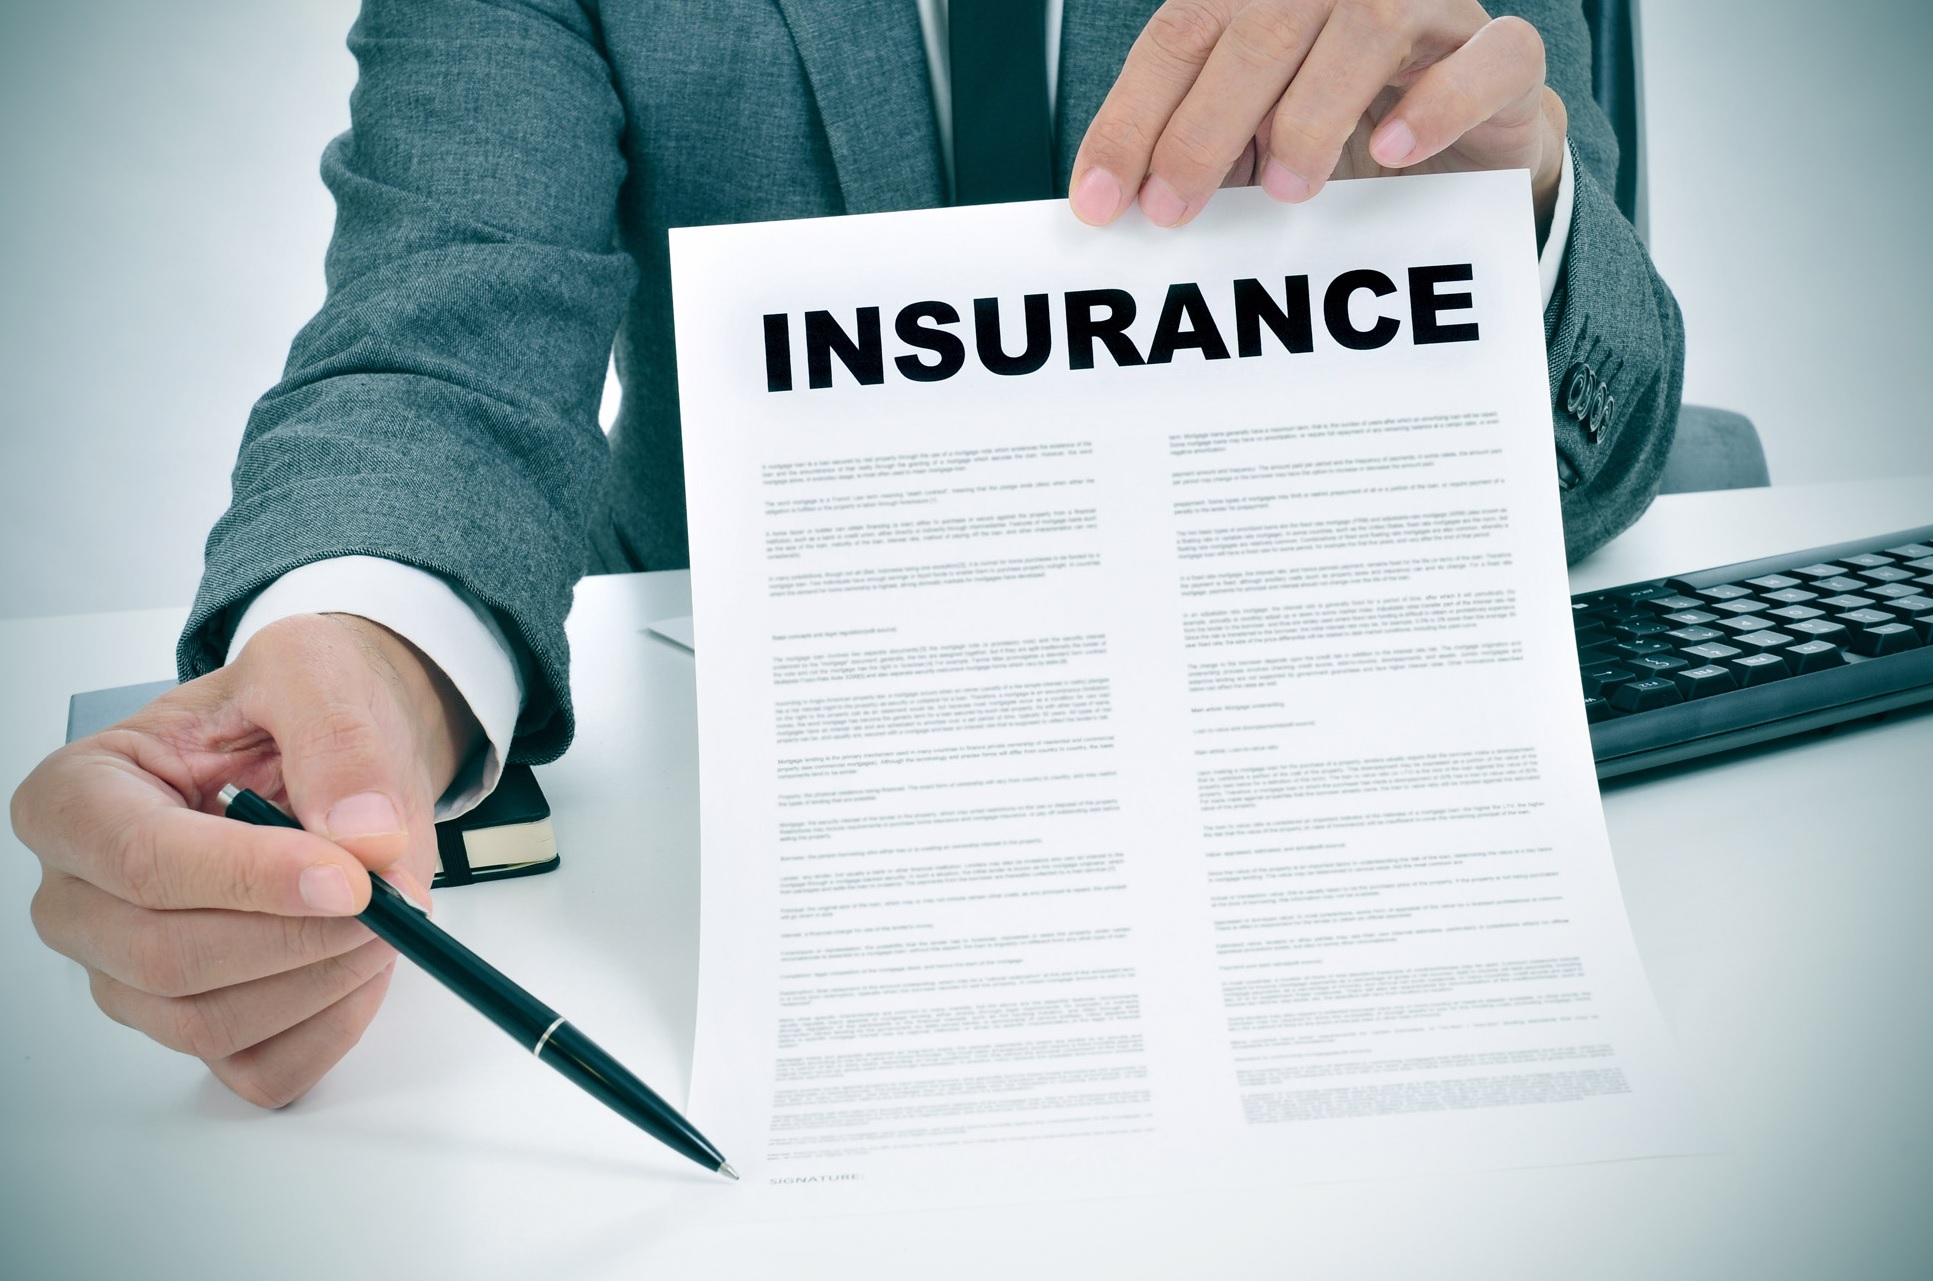 IRDA News Update: If you have also taken insurance then big news has come, IRDA is now making this plan!